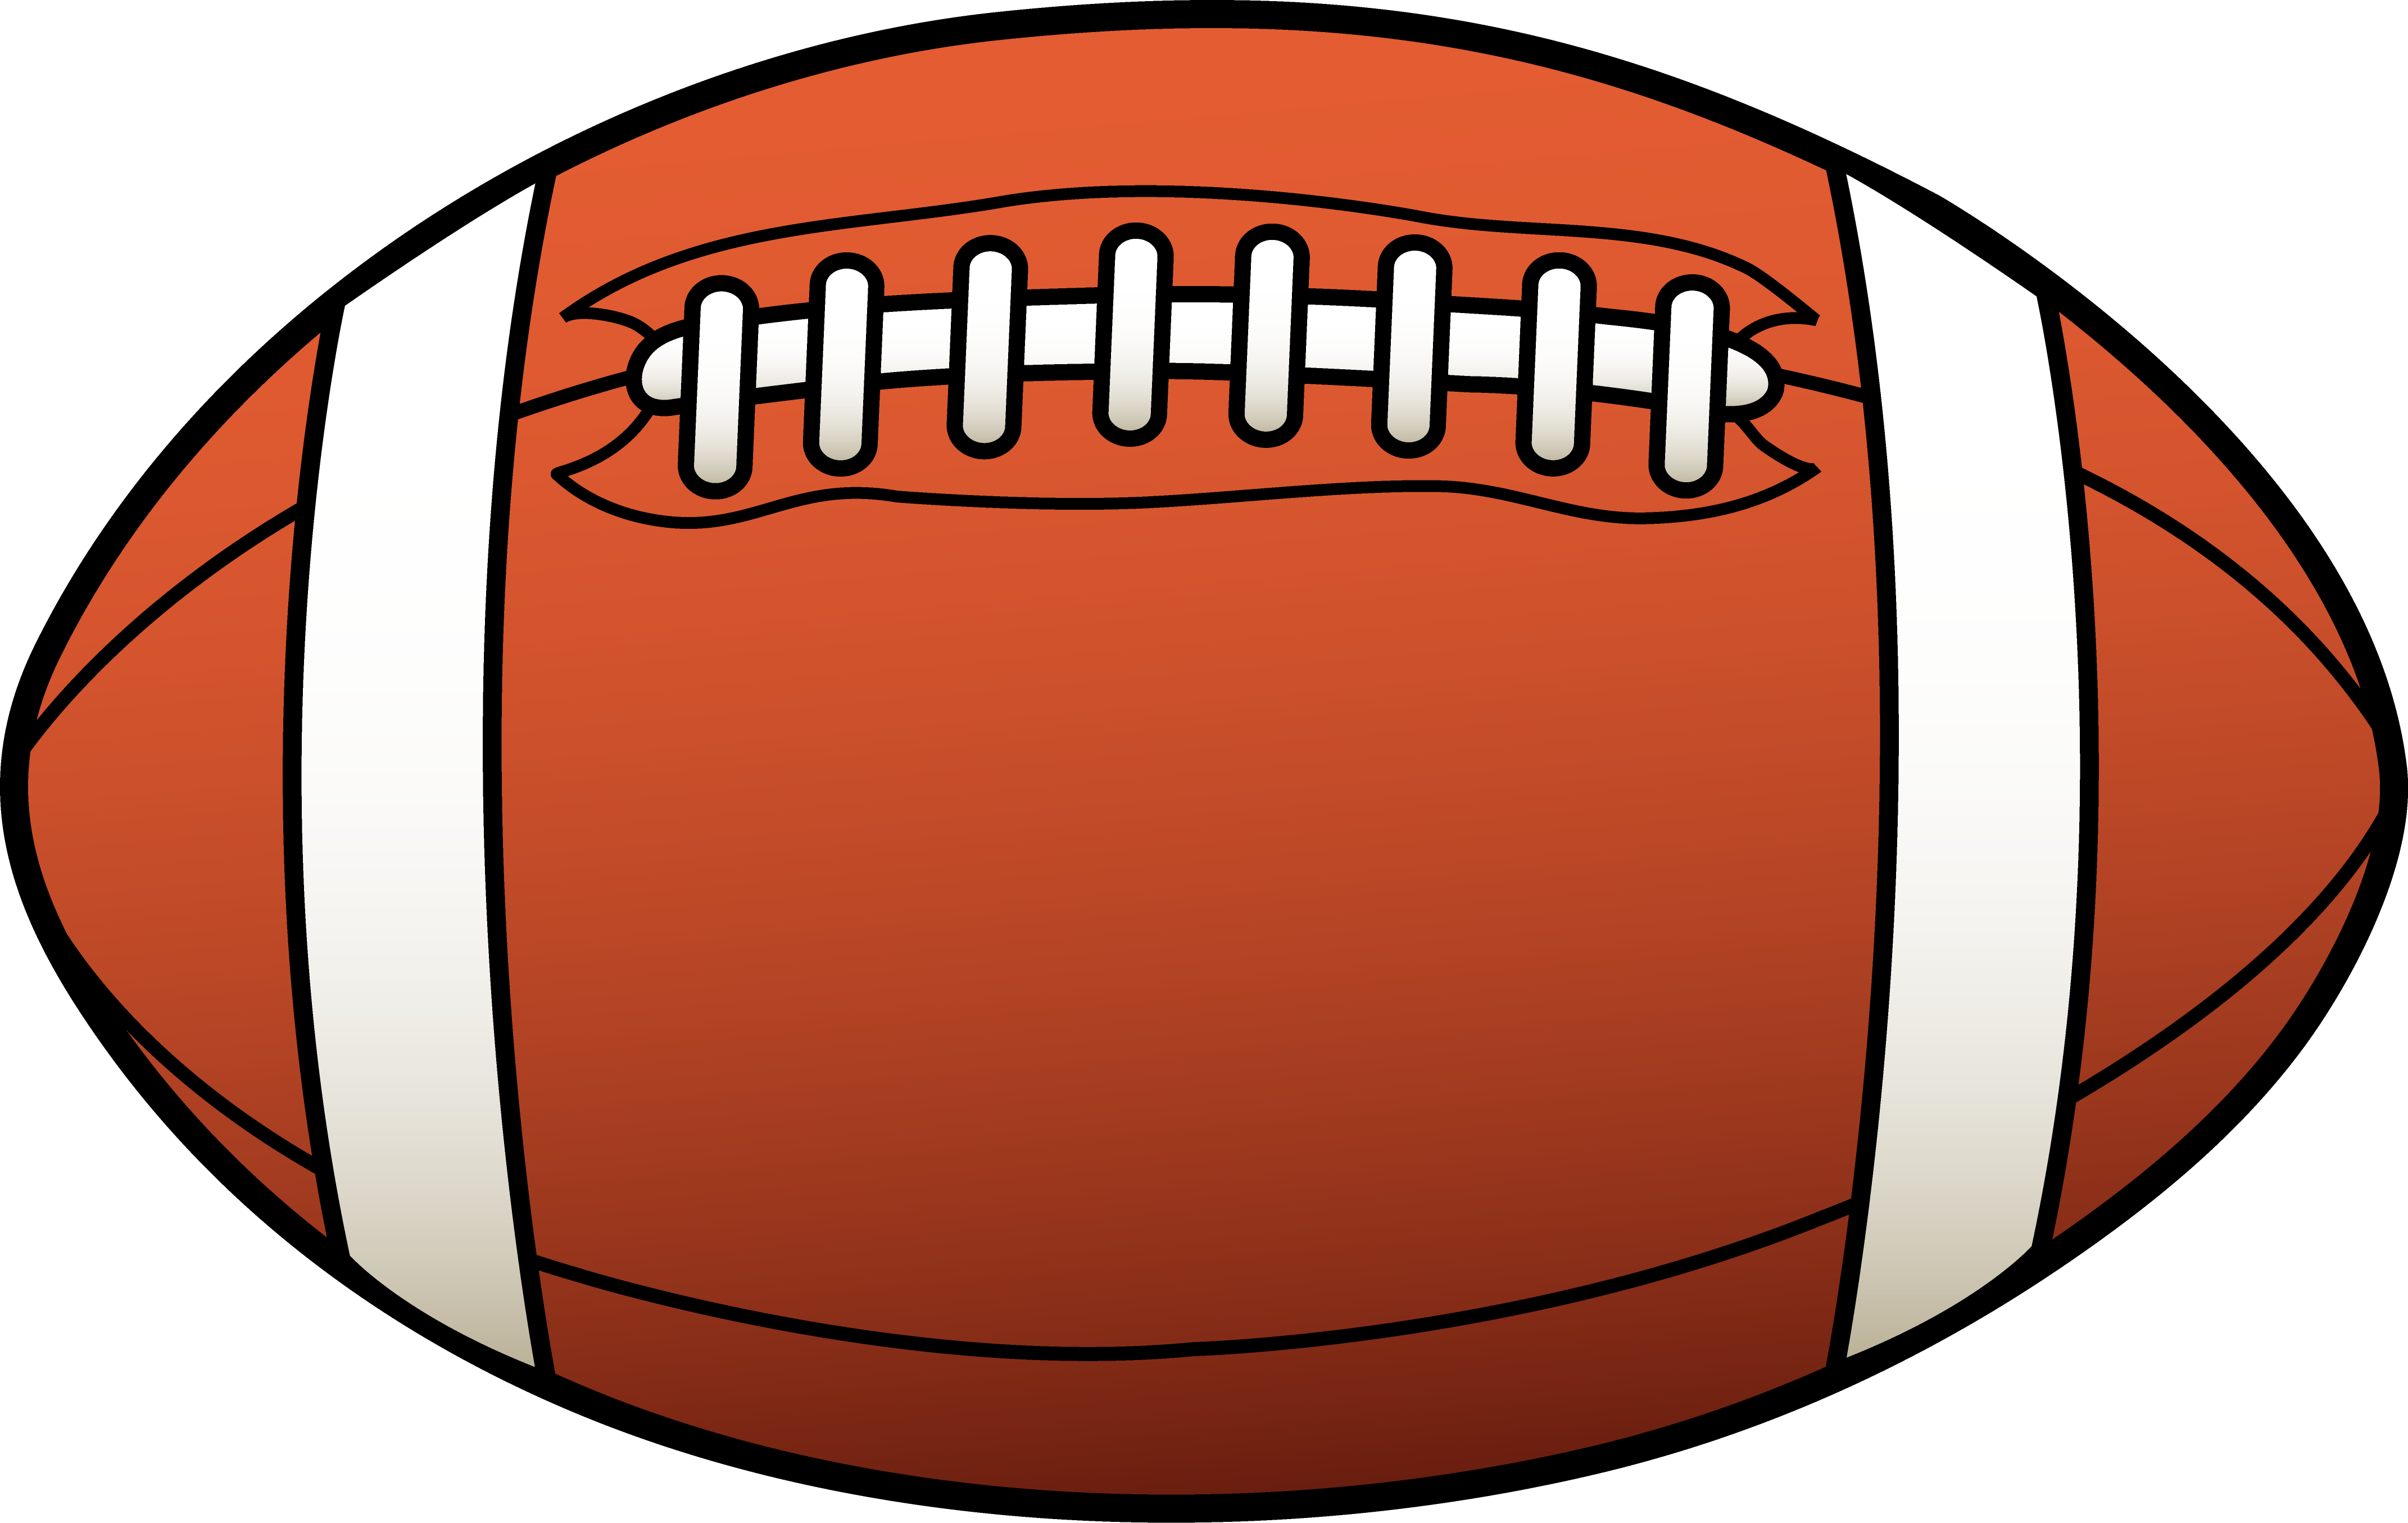 Rugby Ball Or American Football Free Clip Art | All About Soccer ...